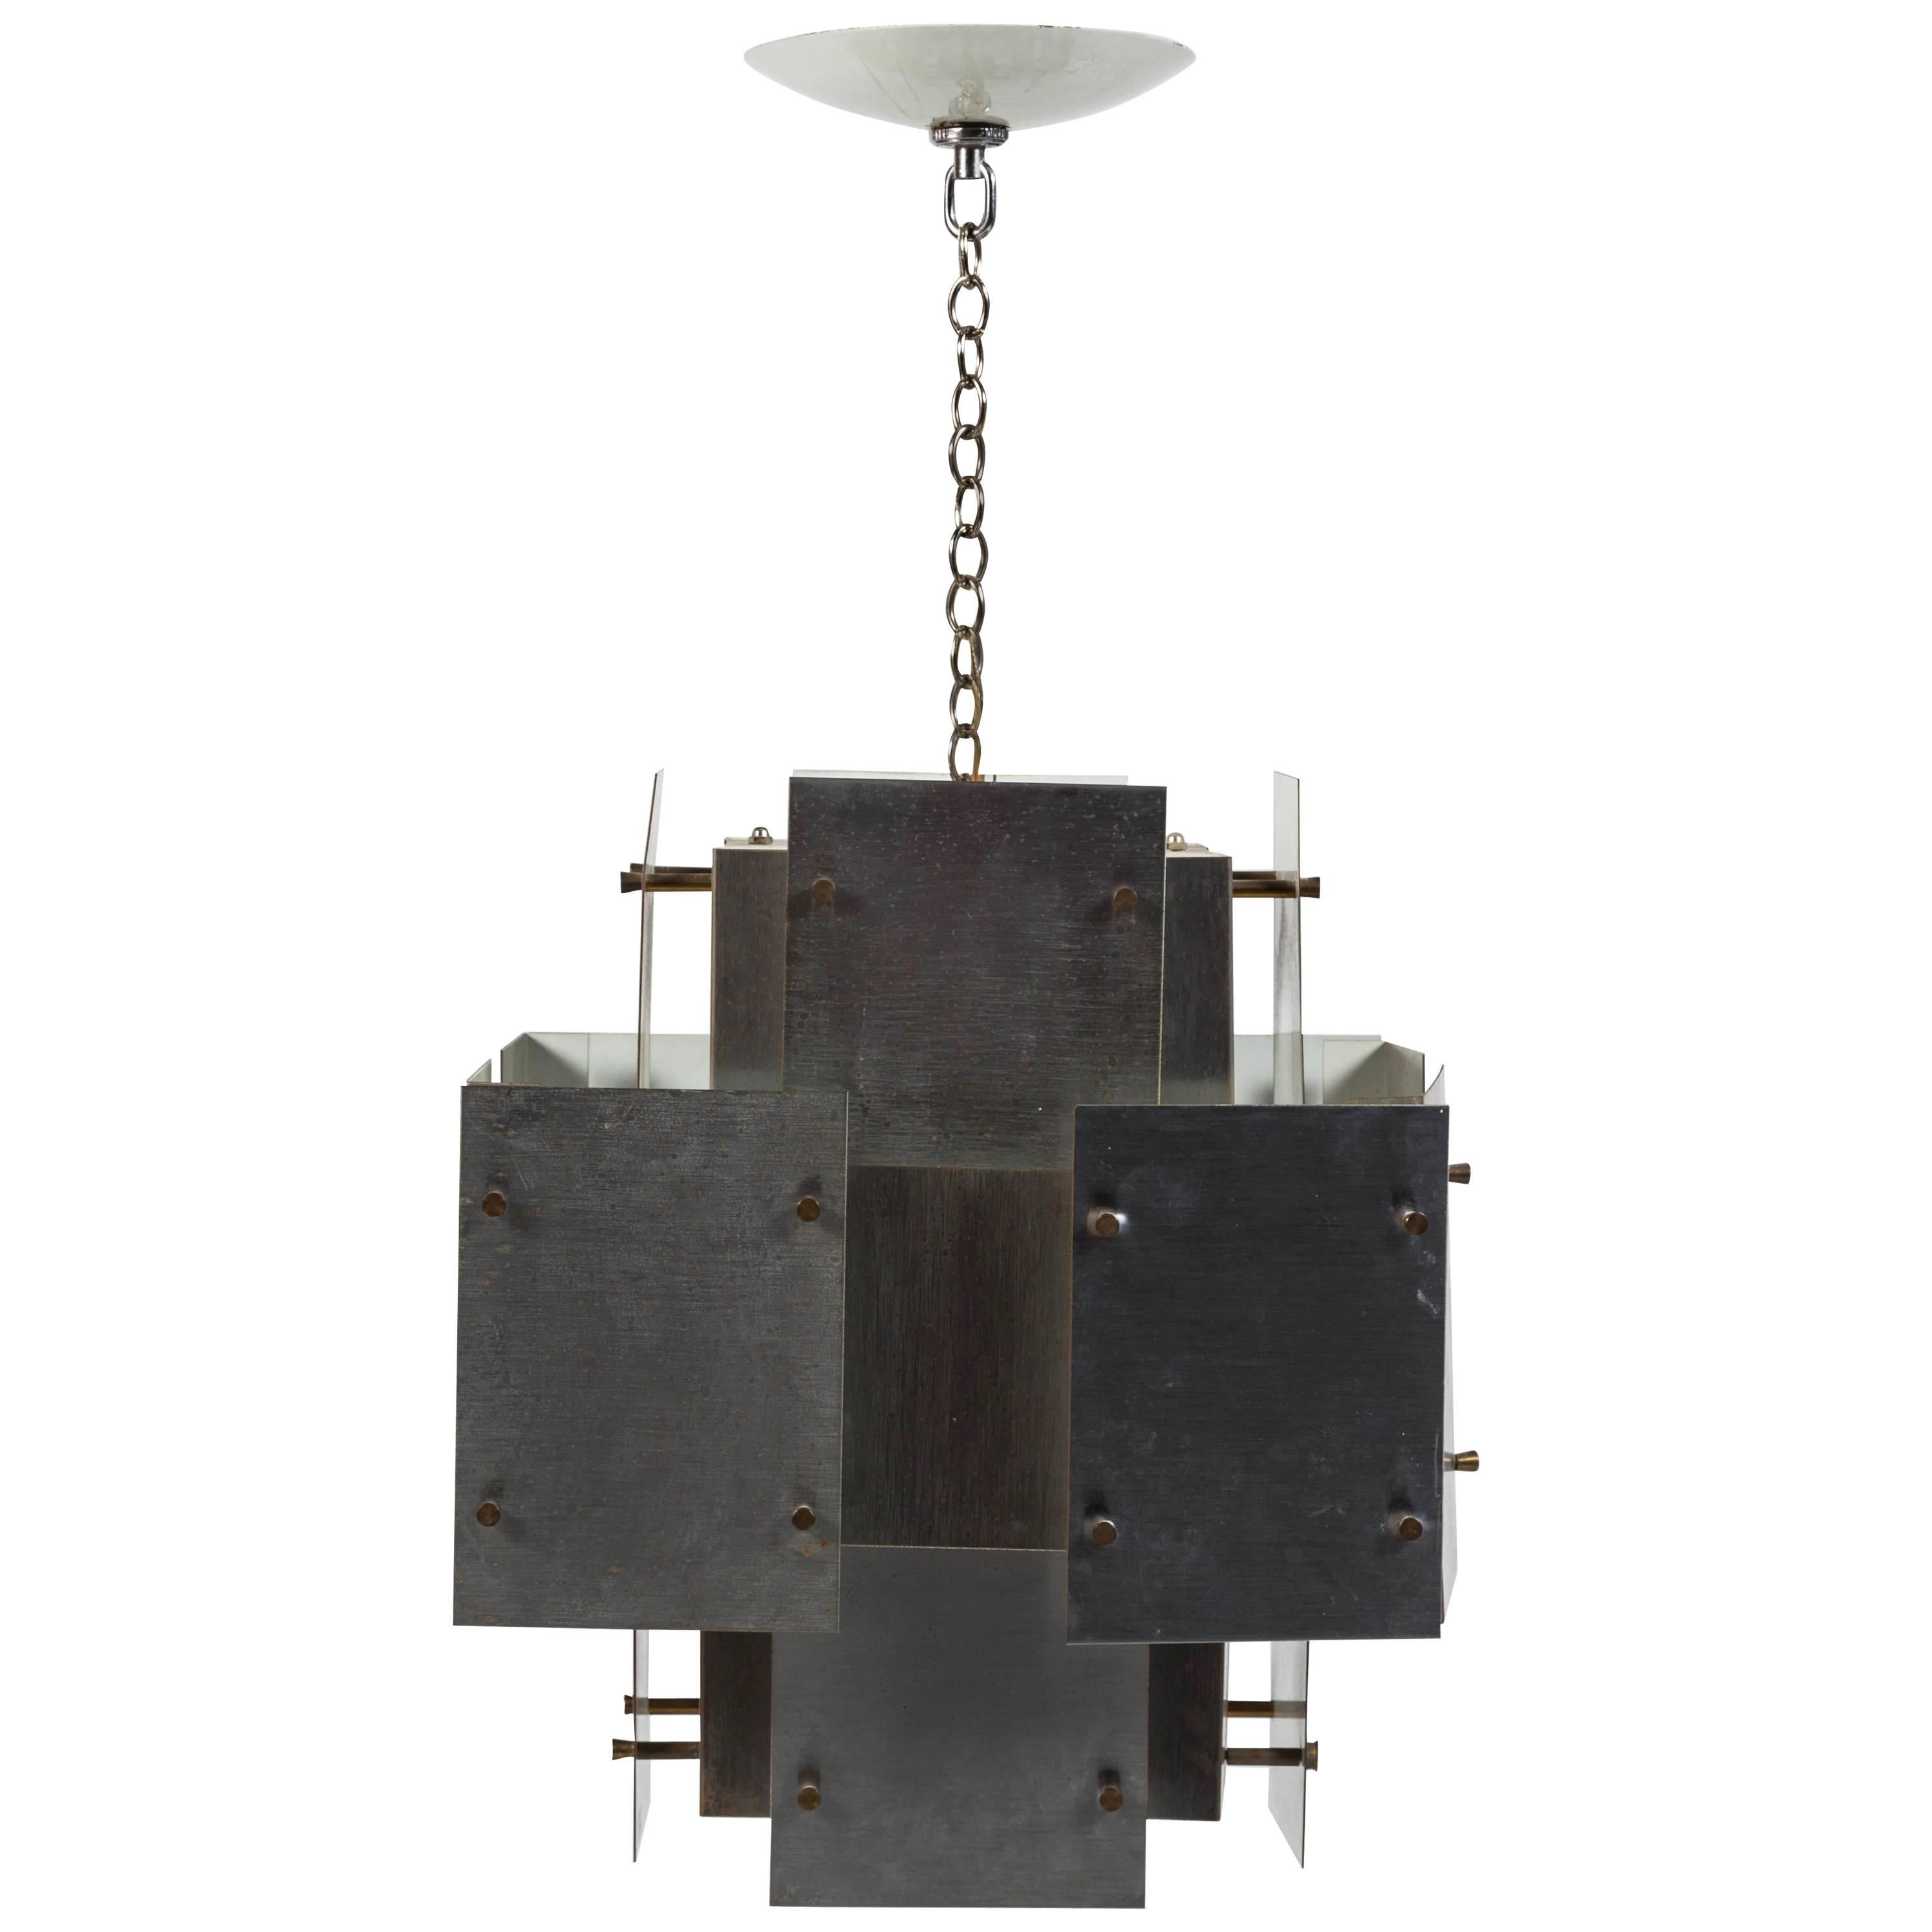 Constructivist light fixture with polished steel plates and brass pin fittings by Gaetano Sciolari. 1960s, Italian. Chain drop is 10